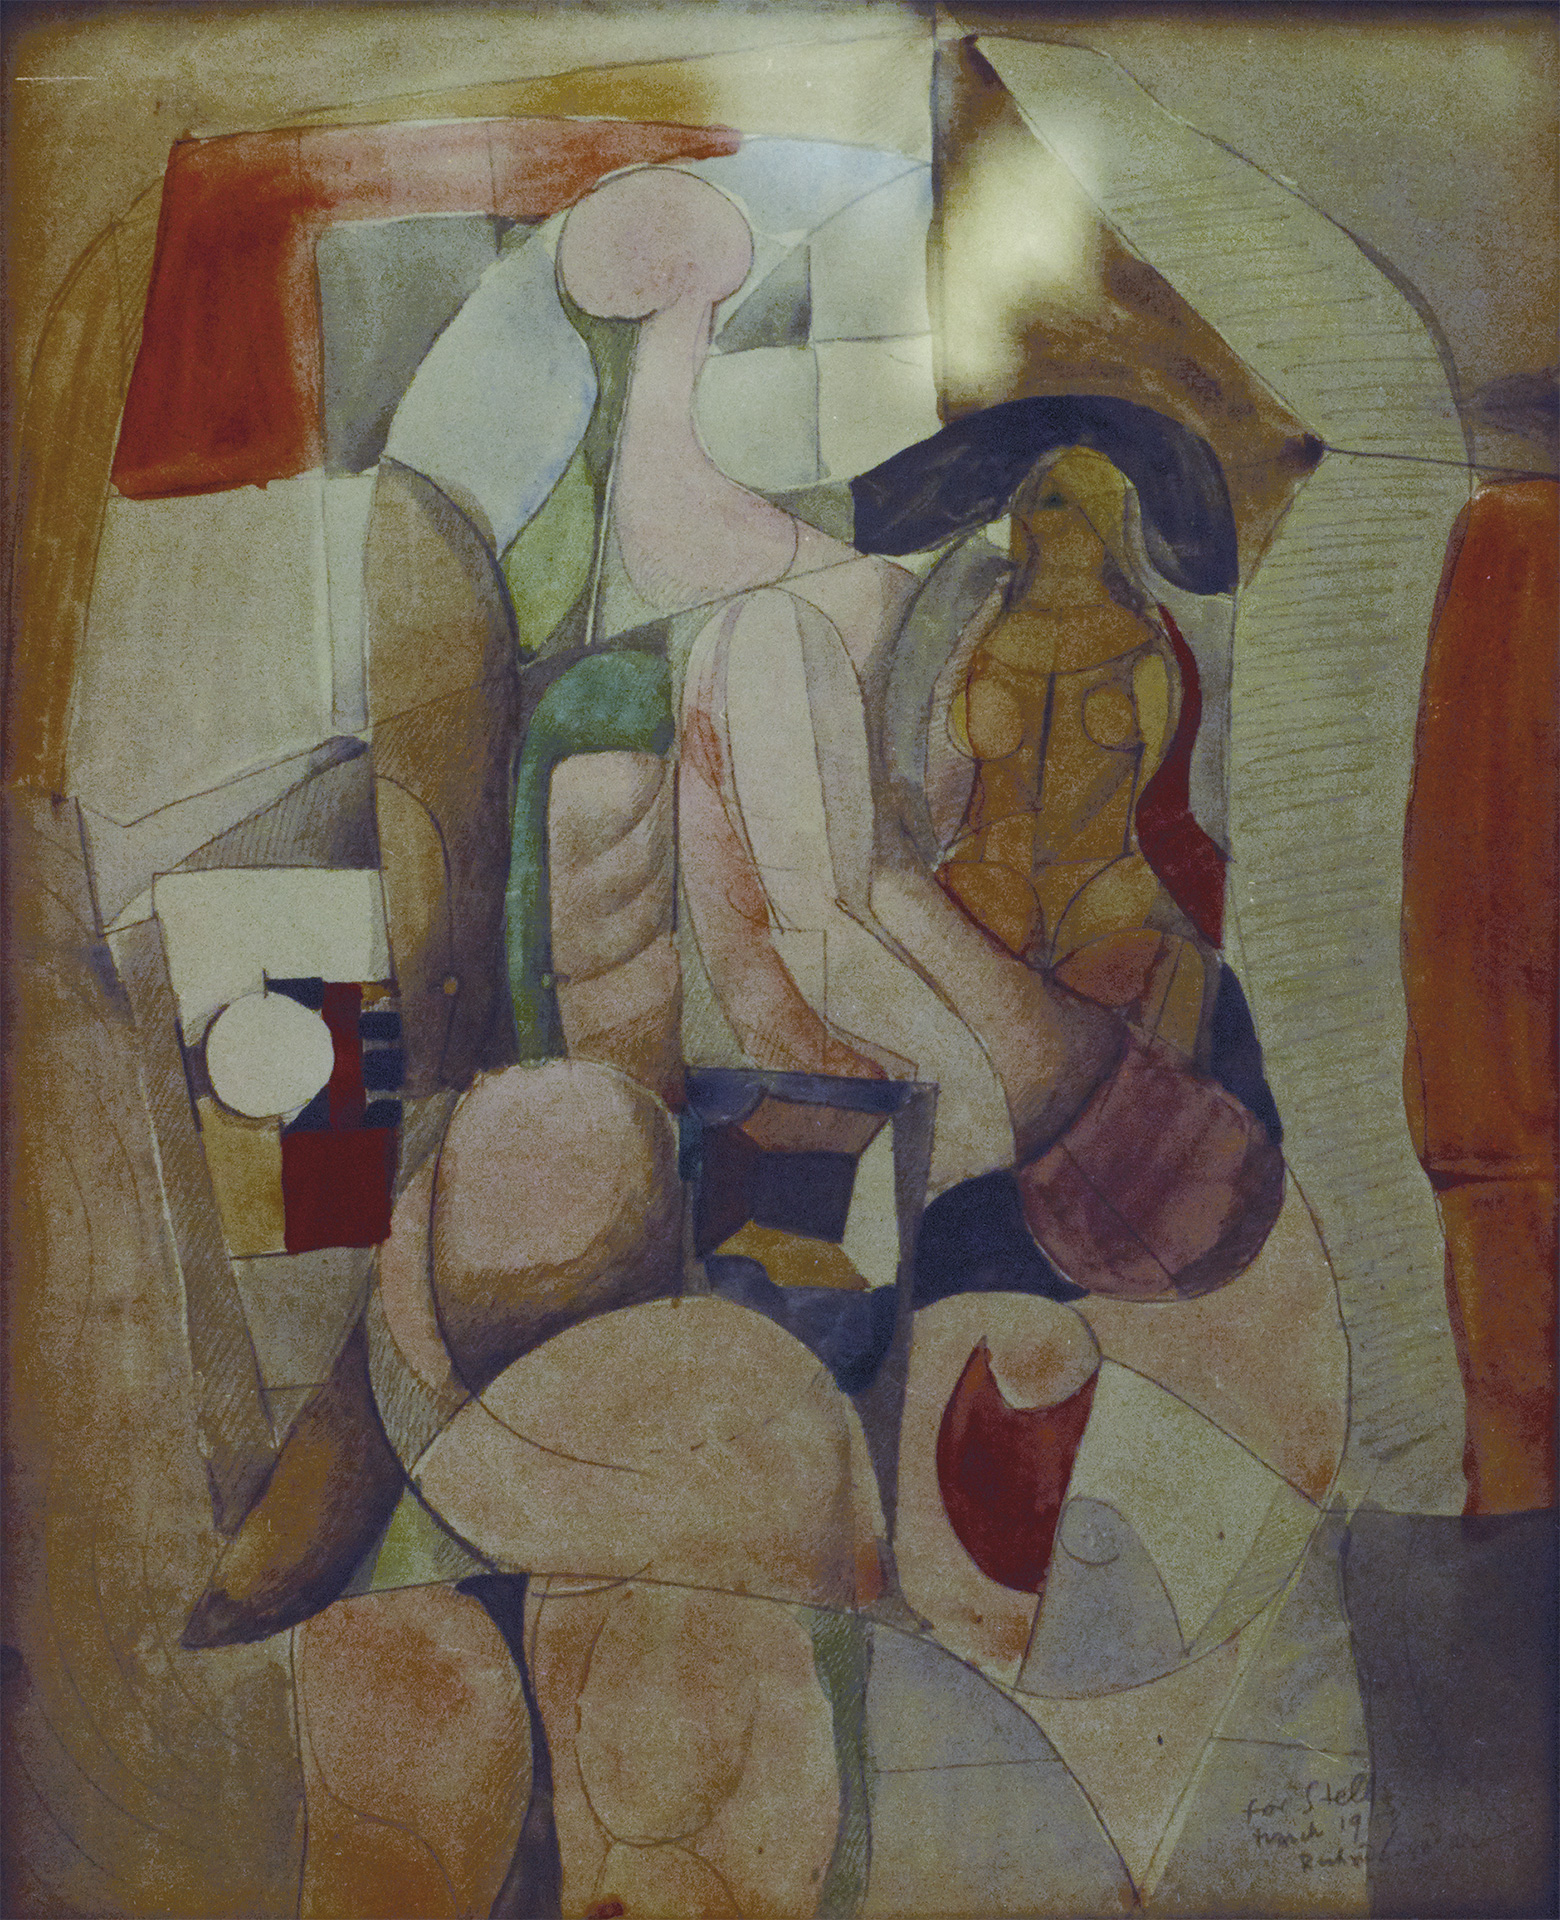 Untitled (Pause), 1958